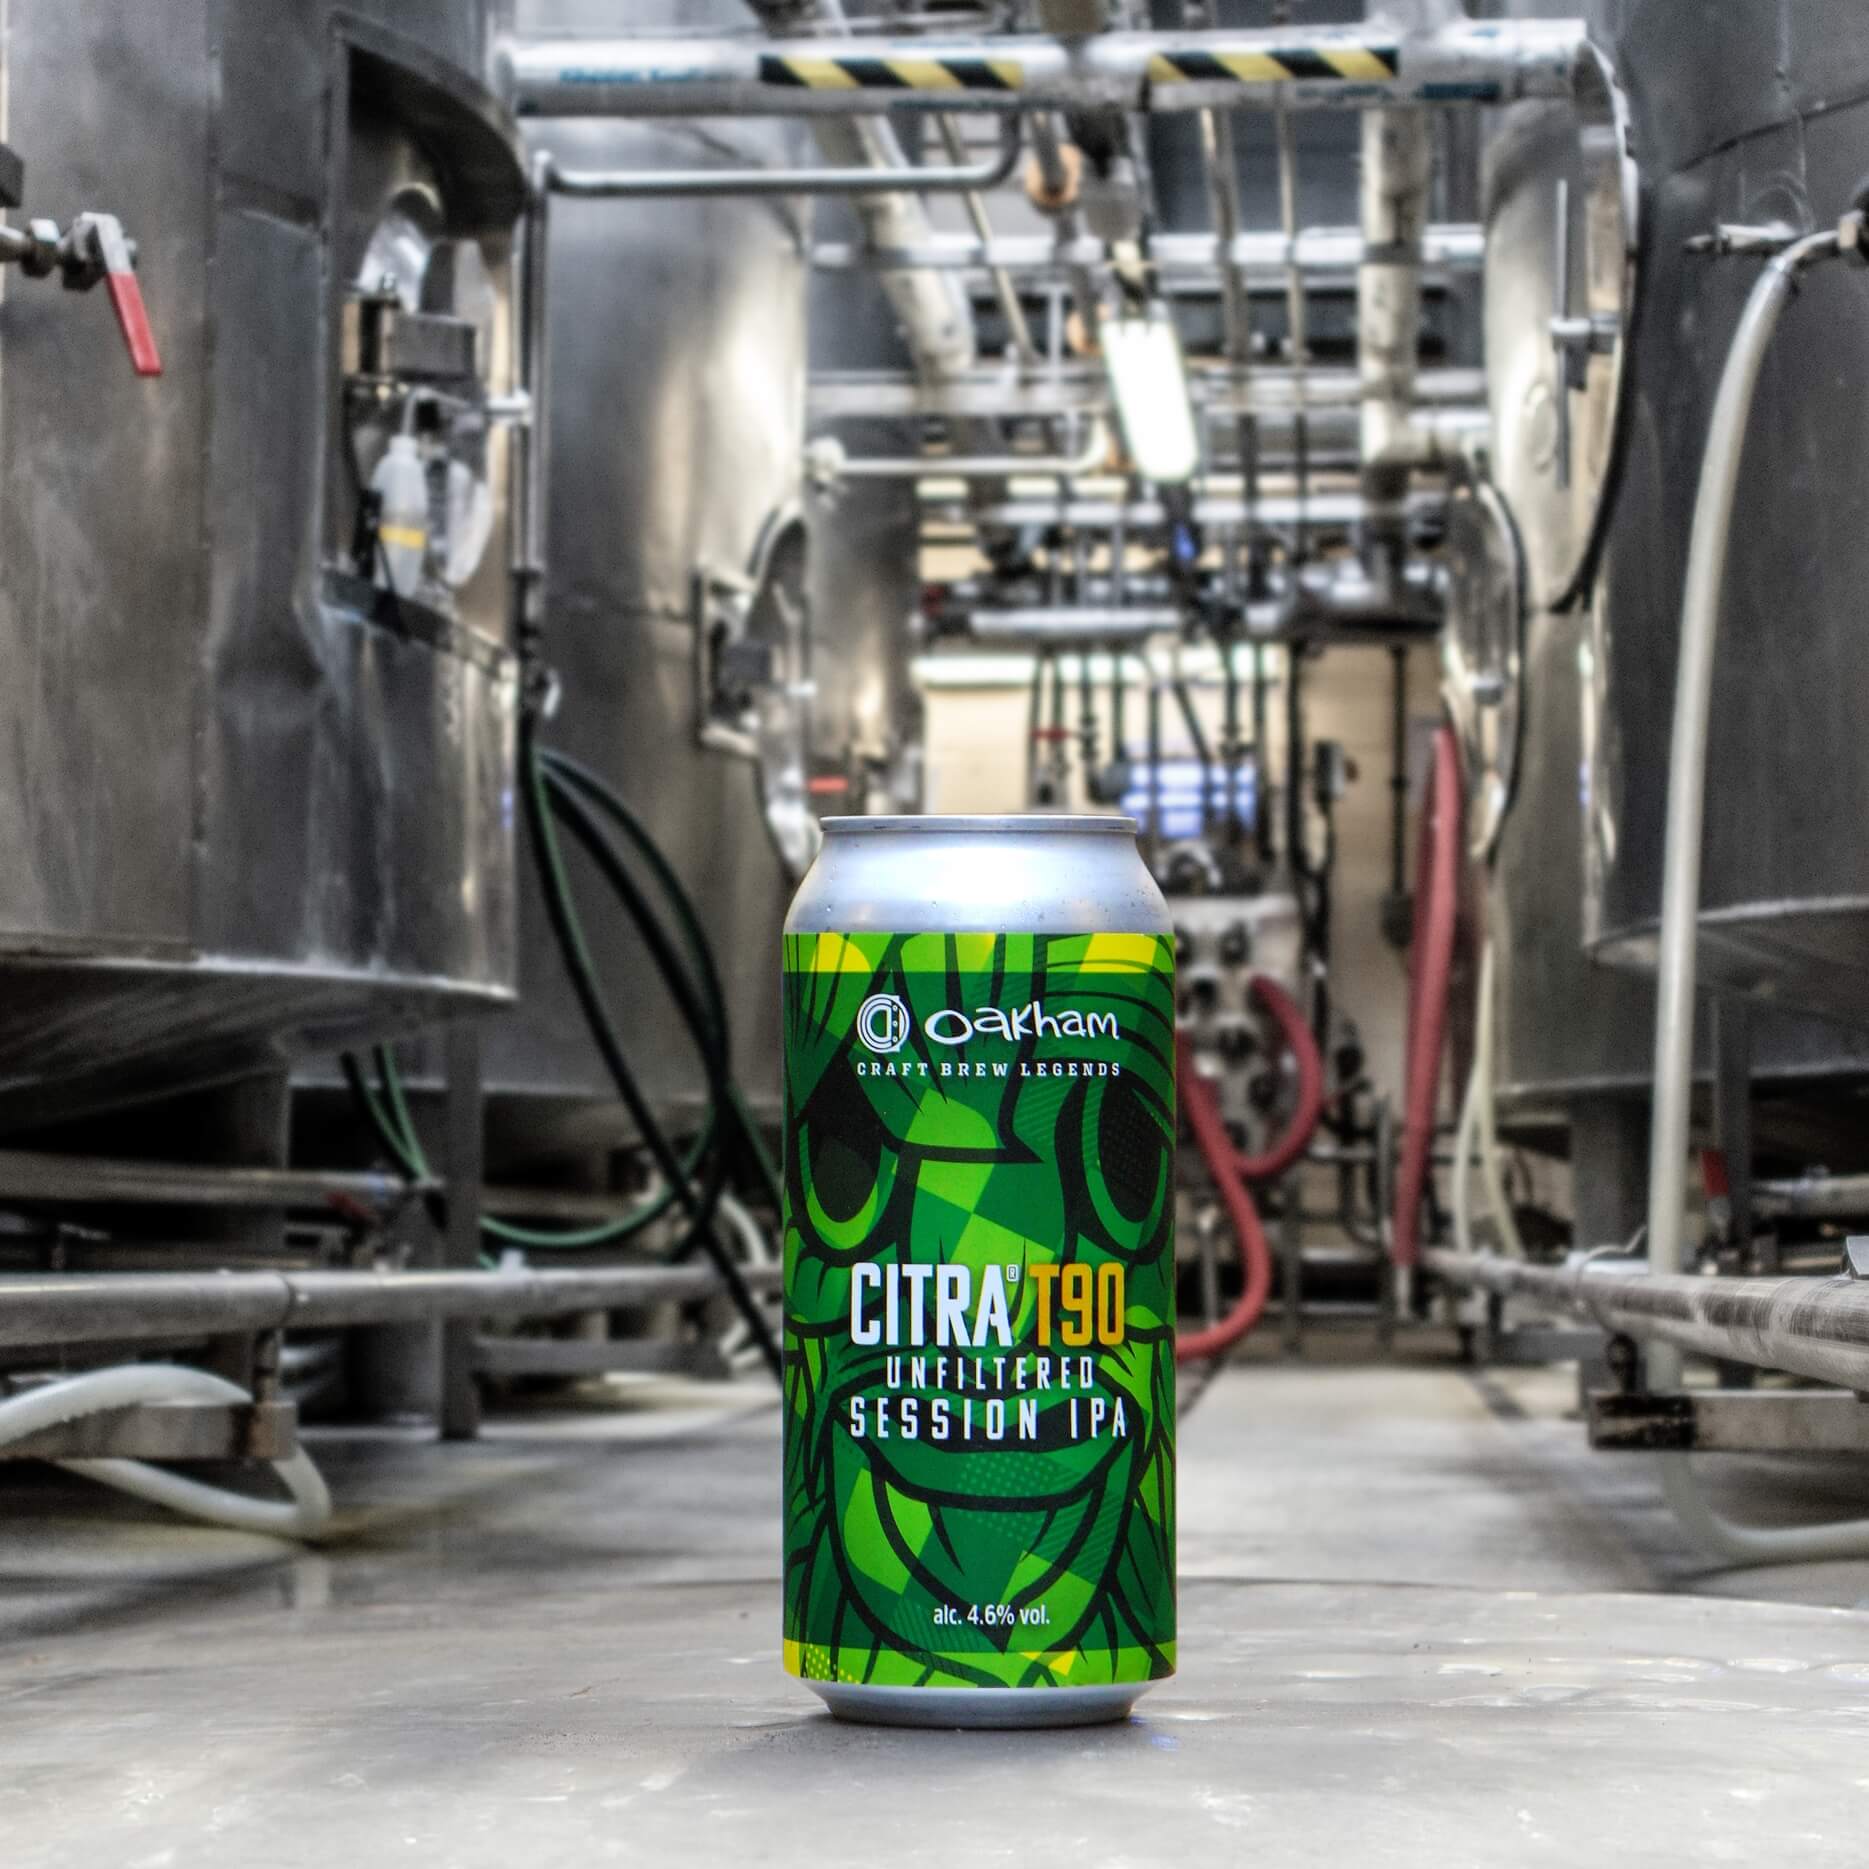 Citra Unfiltered can